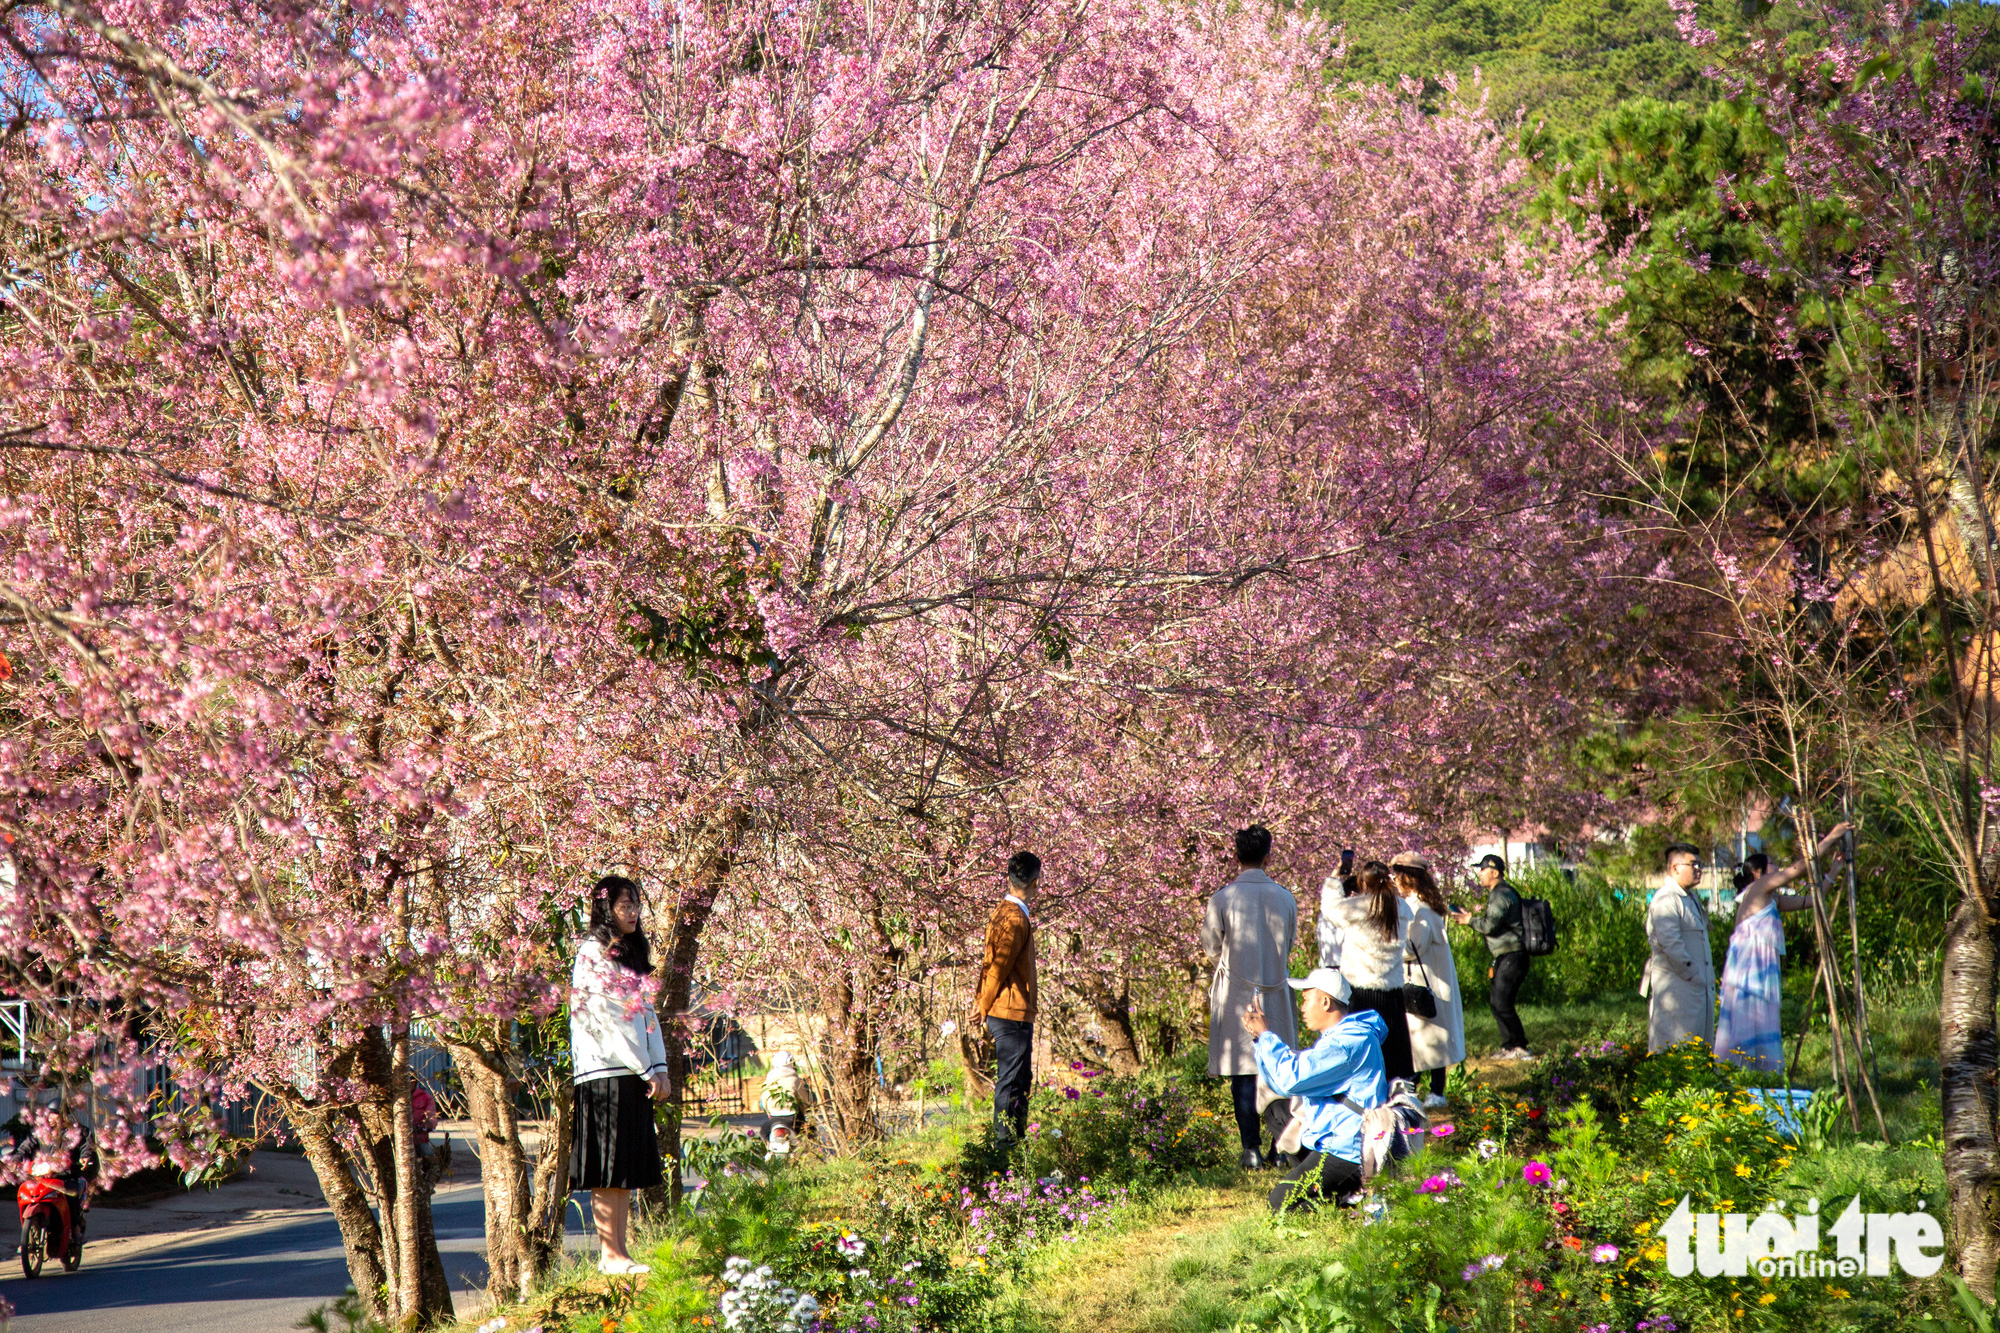 Blooming cherry-like apricot trees welcome Tet in Vietnam’s Da Lat